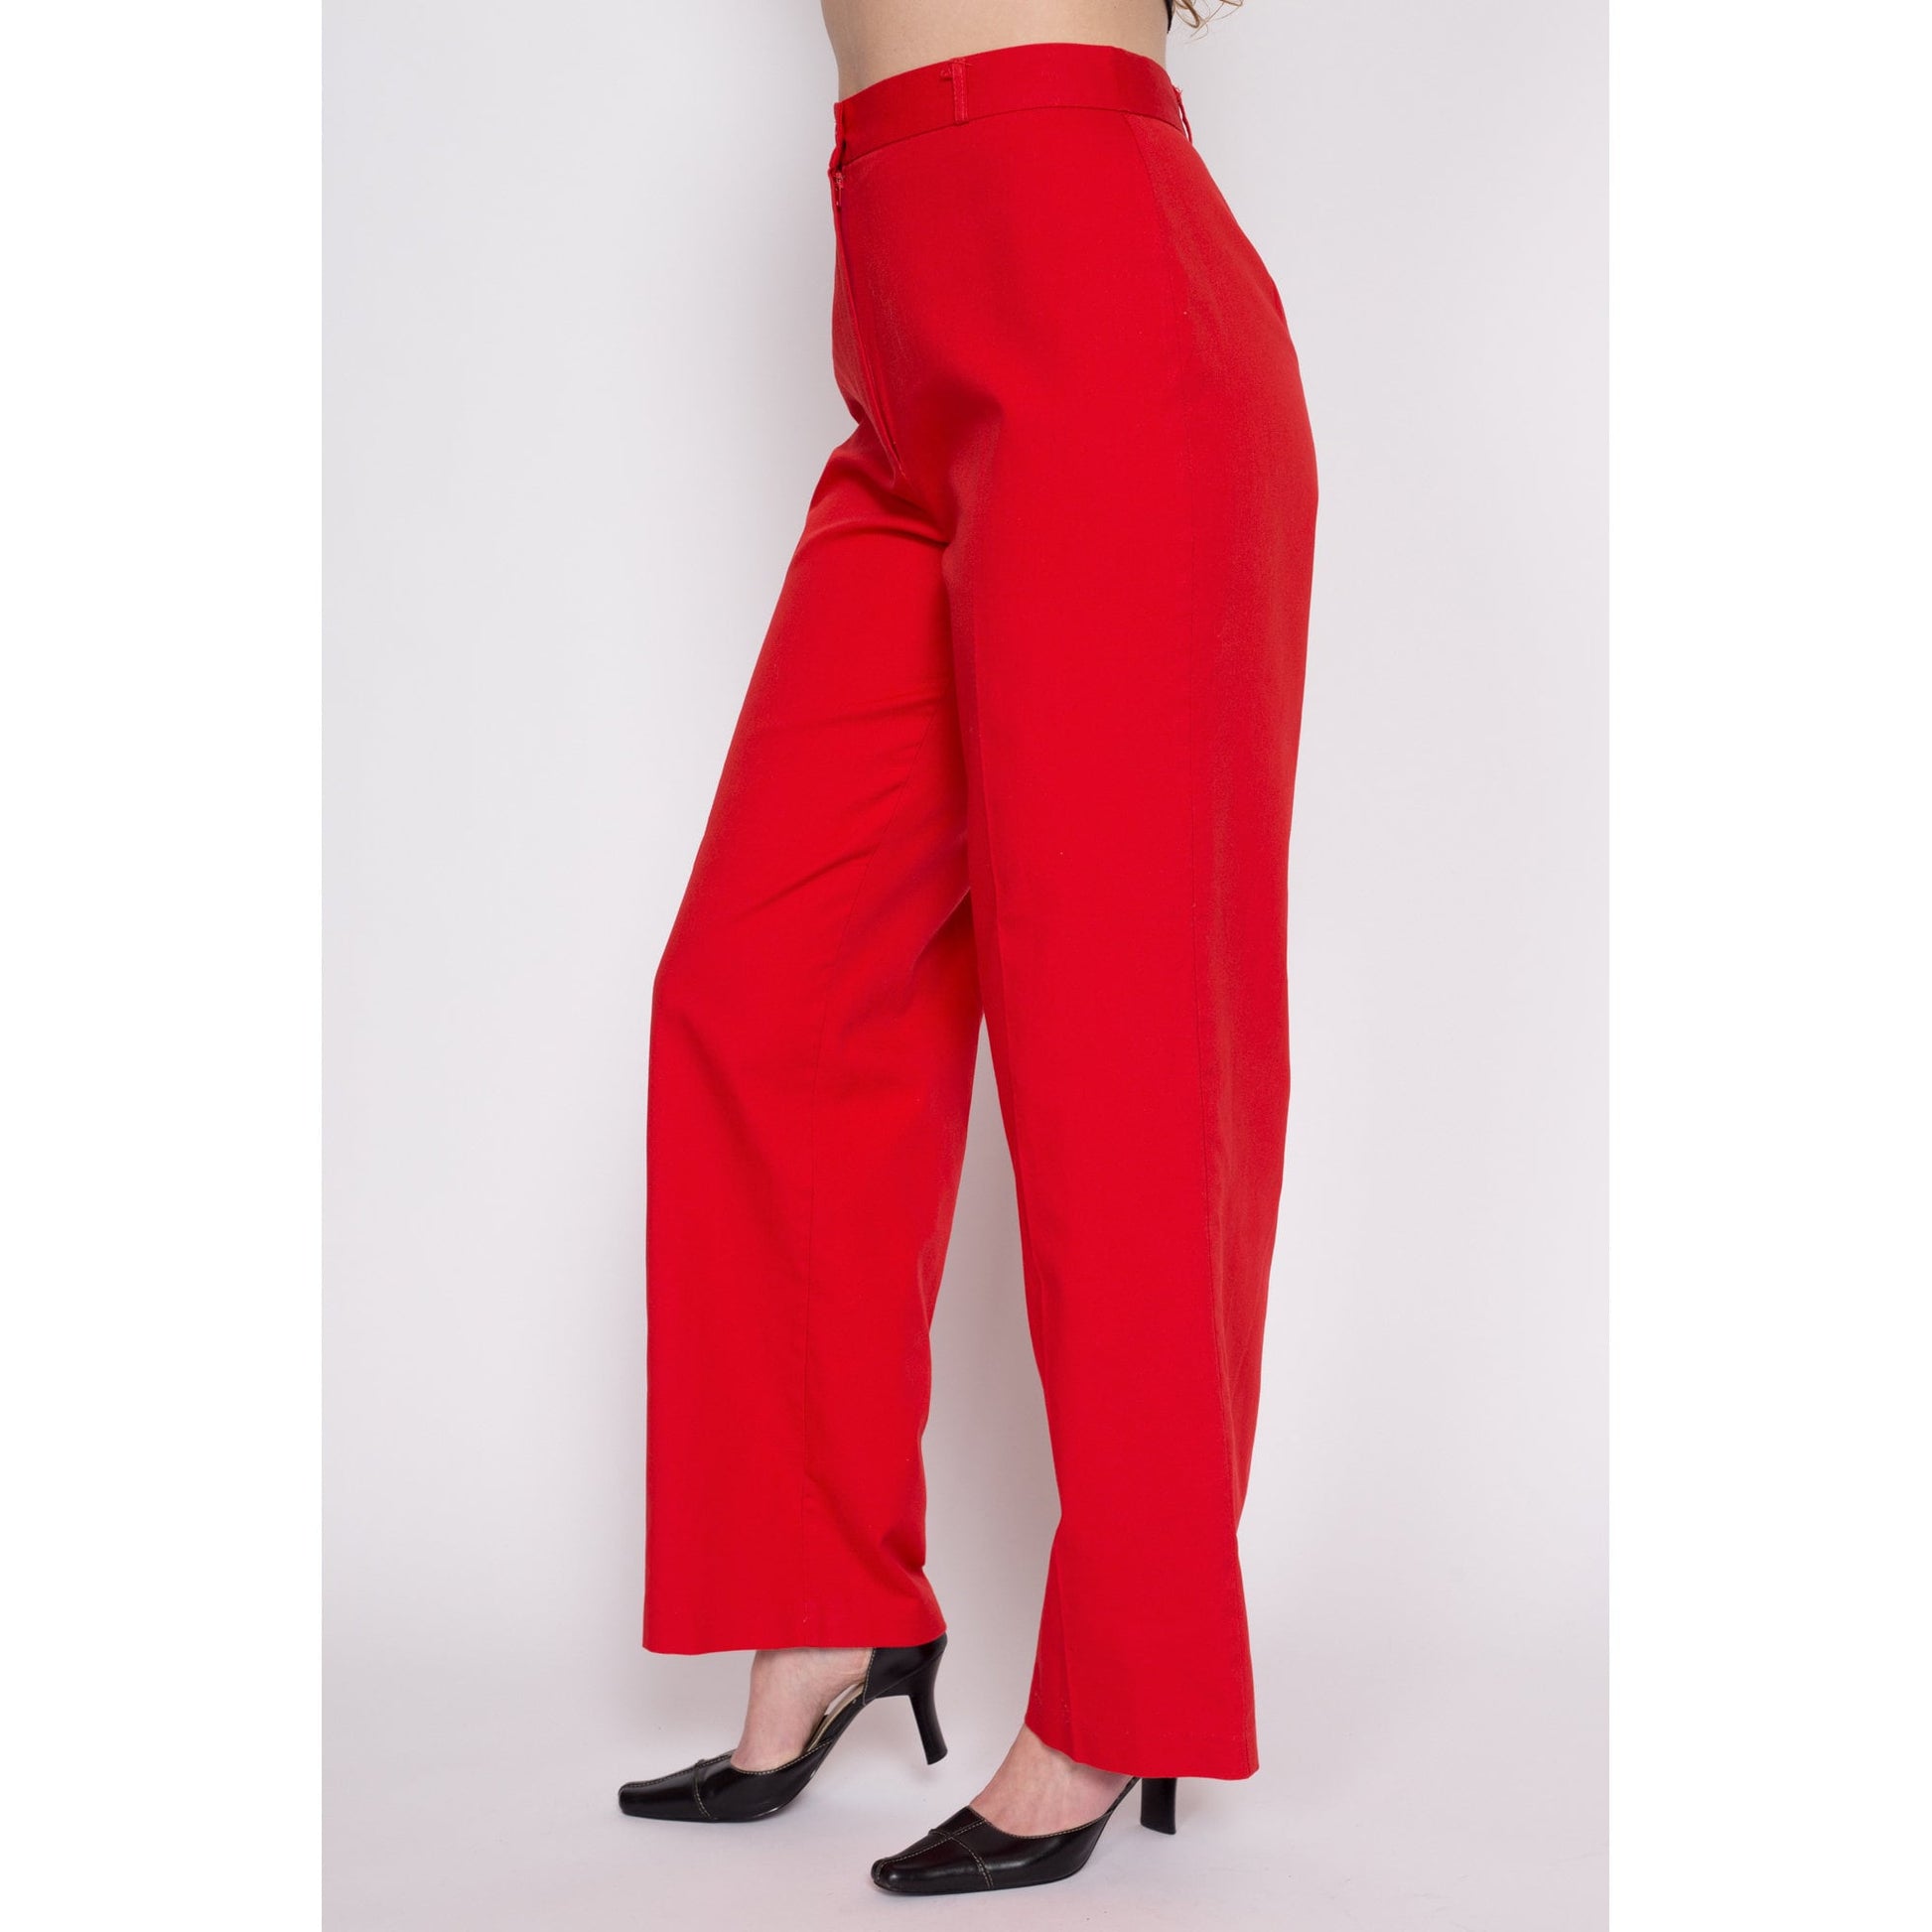 70s Red High Waisted Pants - Medium, 28.5 – Flying Apple Vintage